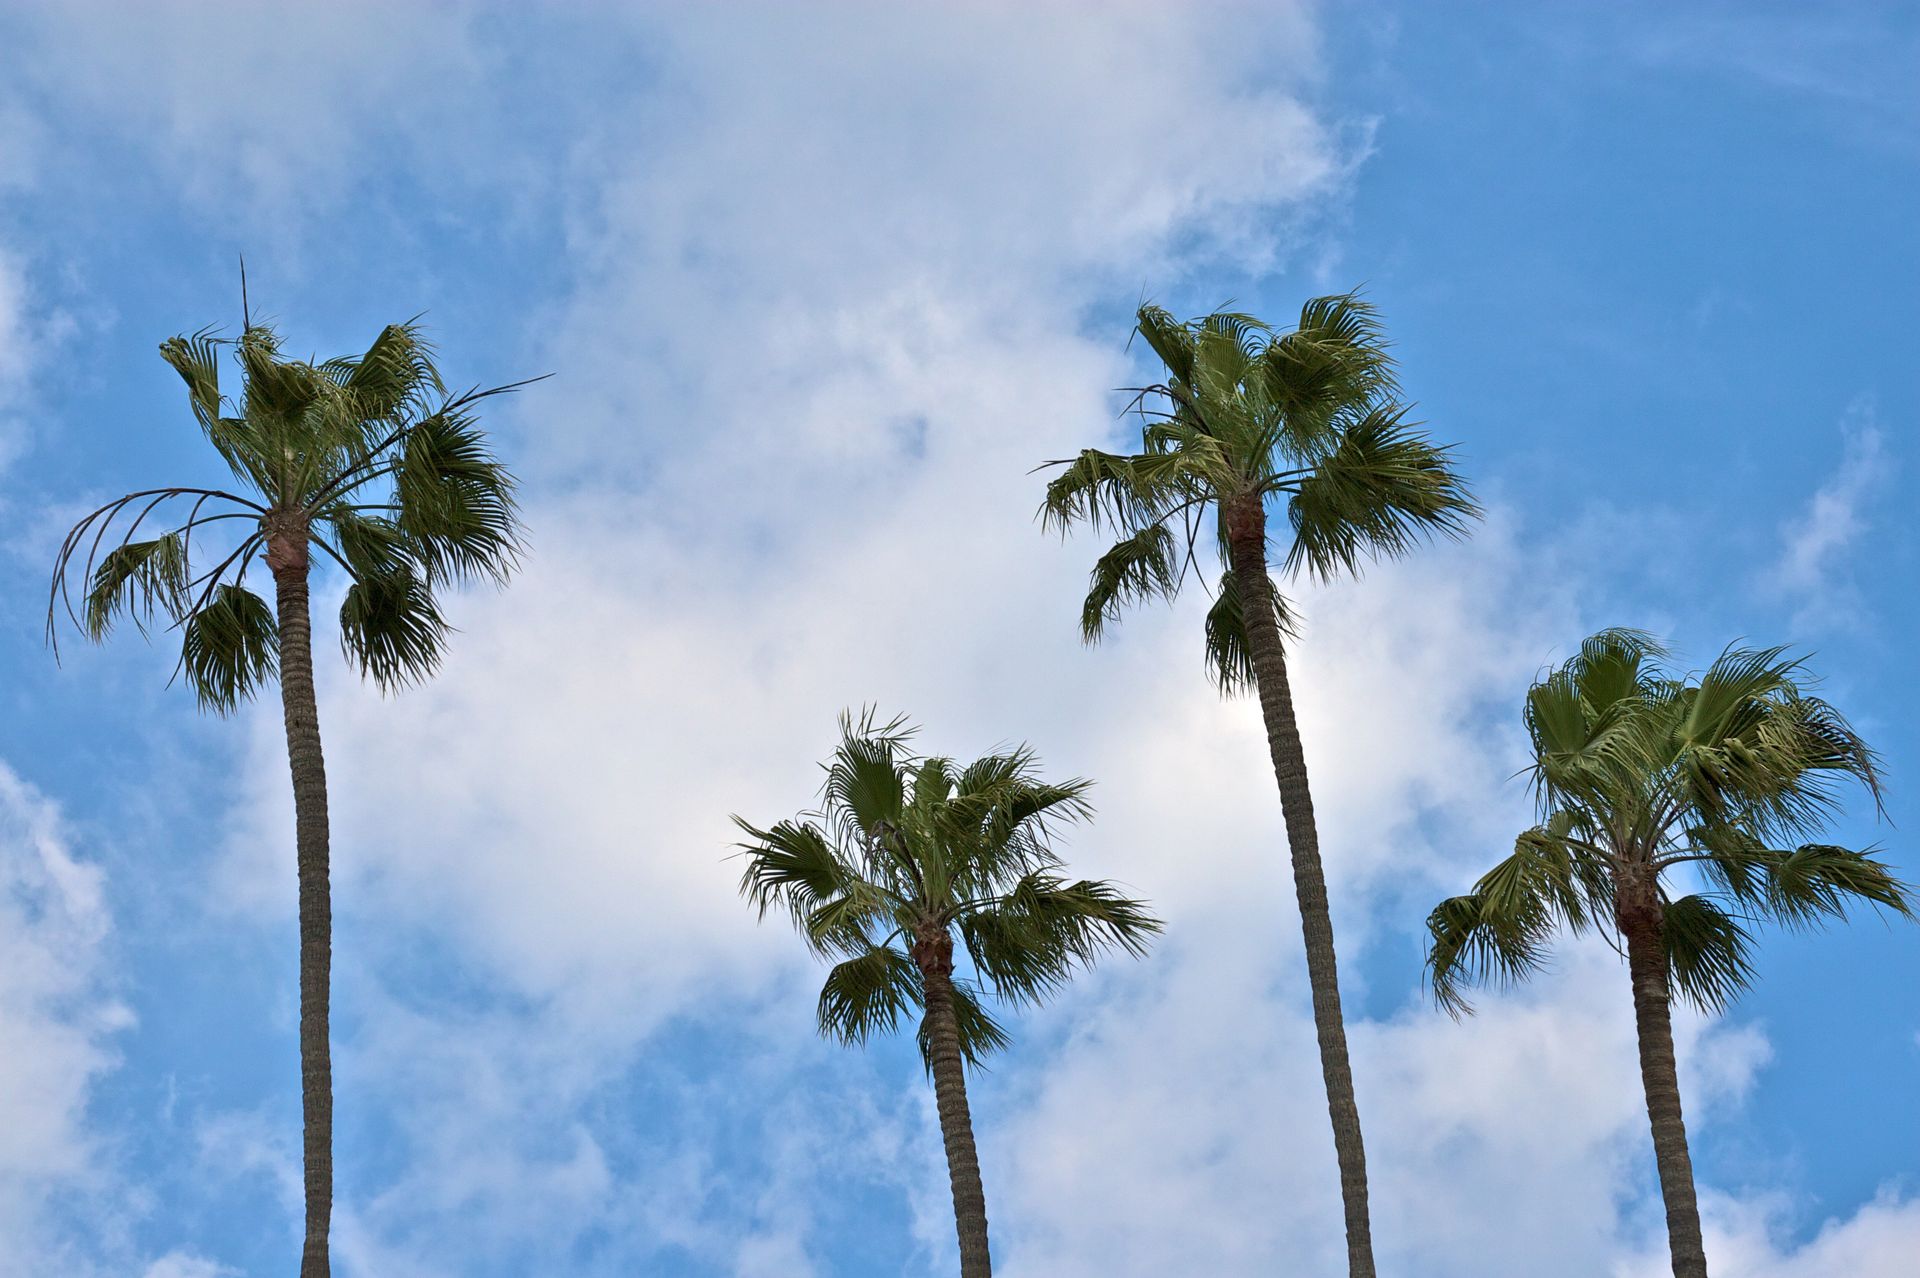 Palm trees in California.